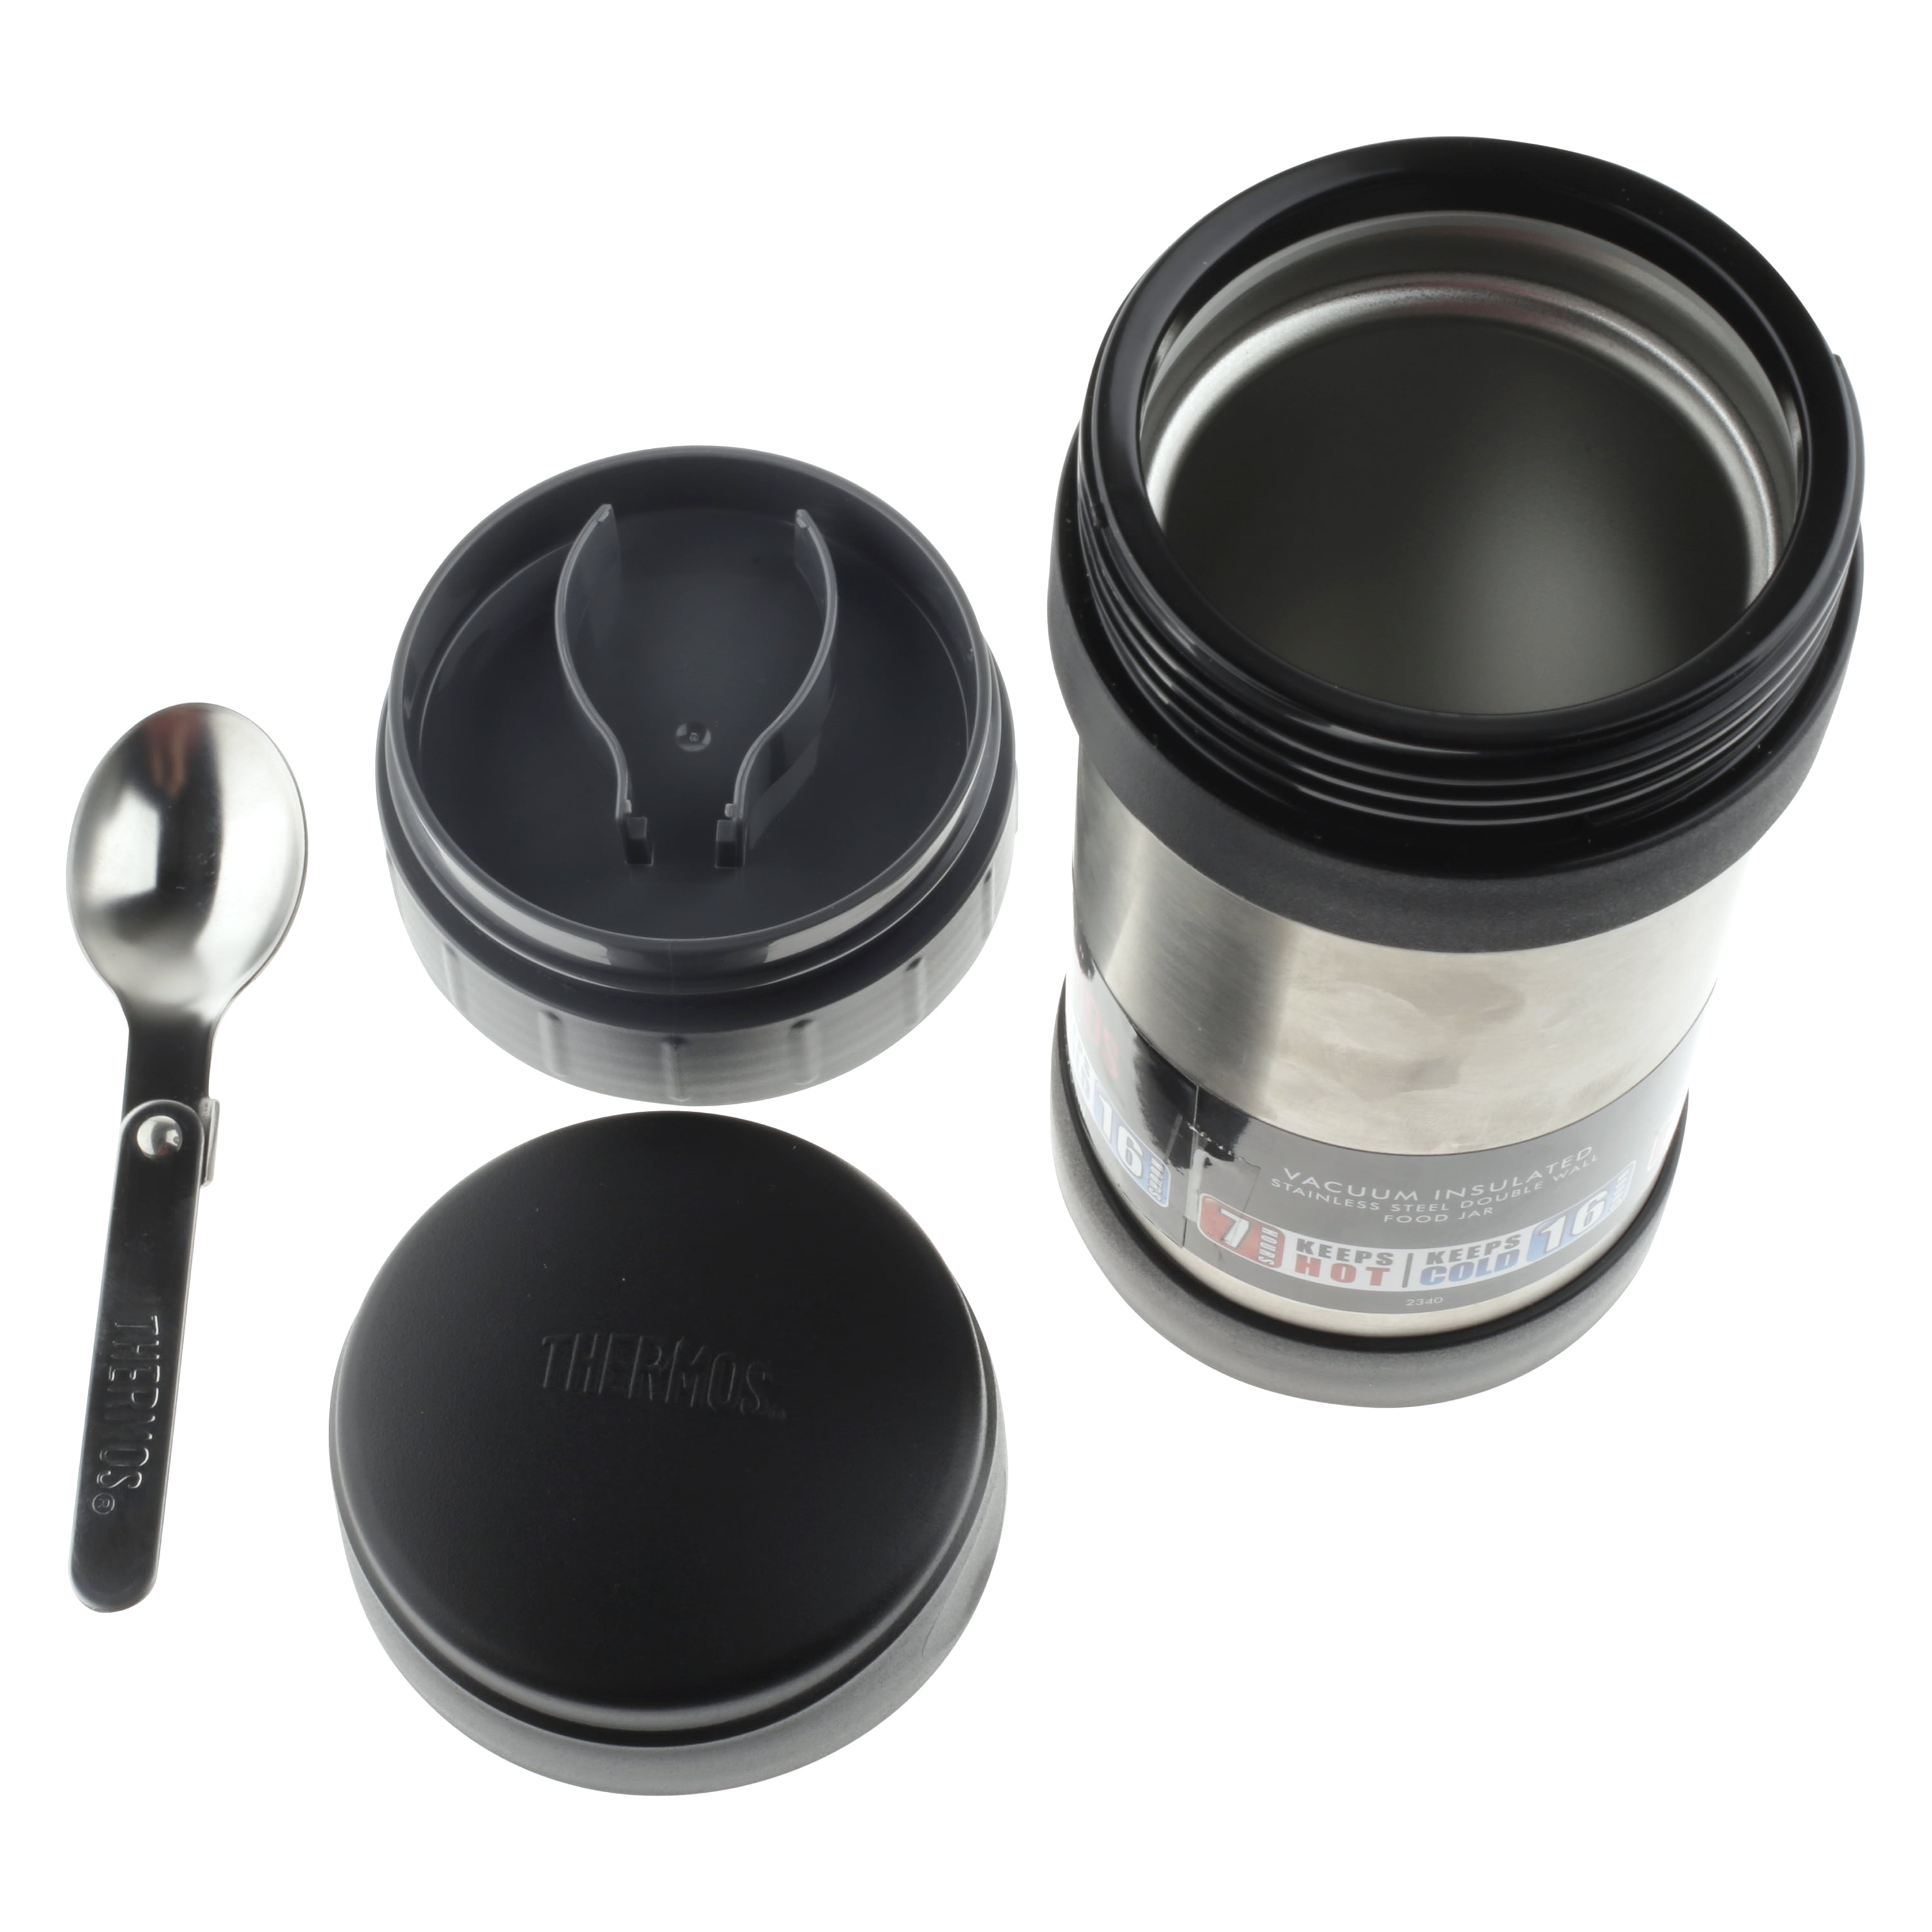 RELAX DREAM Vacuum-Insulated Food Jar with Spoon,16.2 Oz Food